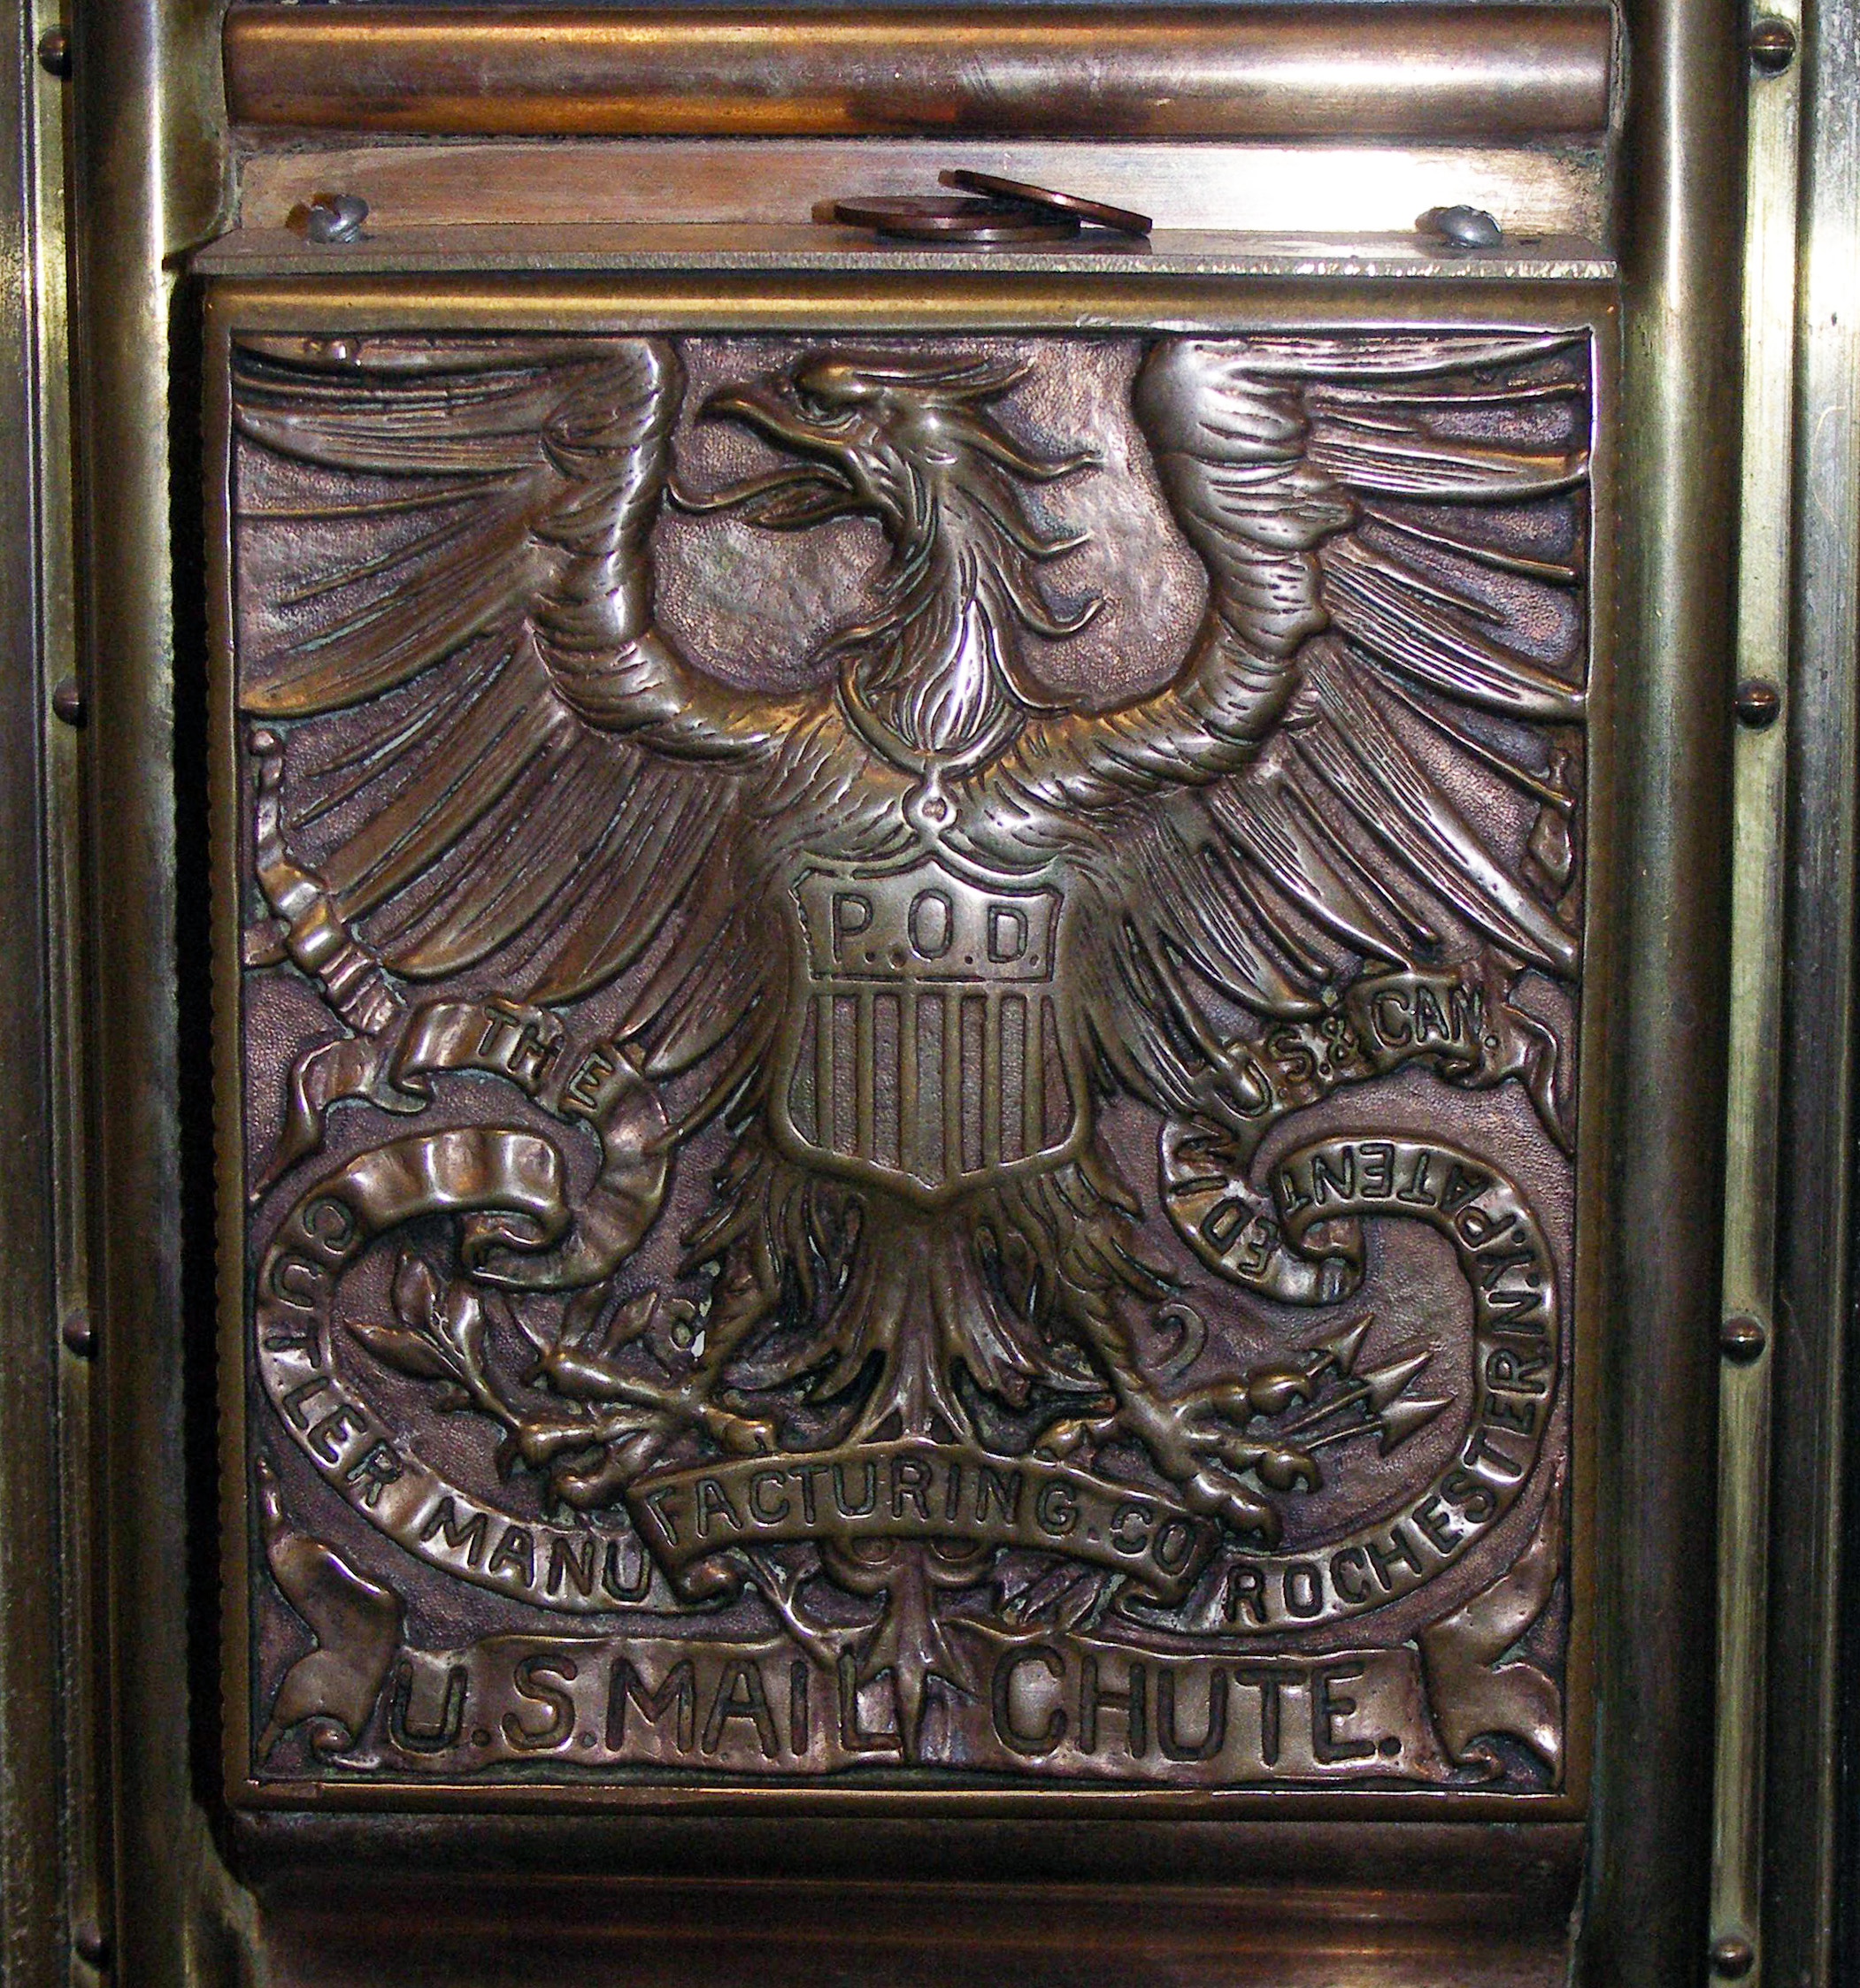 Feast Your Eyes On NYC’s Remarkably Beautiful Mail Chutes